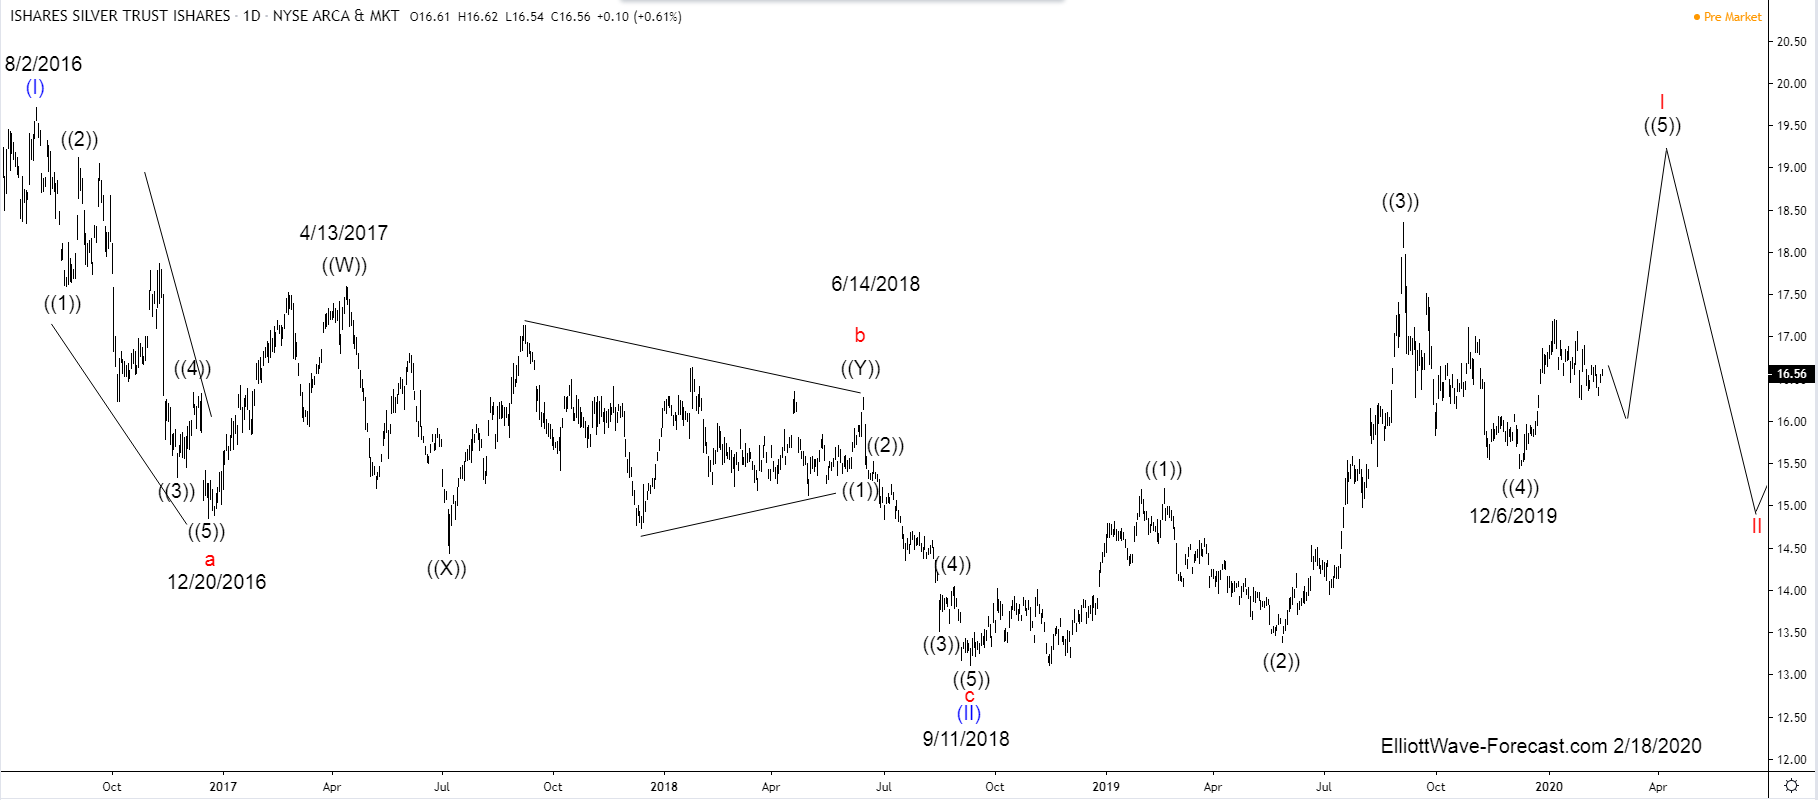 $SLV Ishares Silver Trust Larger Cycles and Elliott Wave